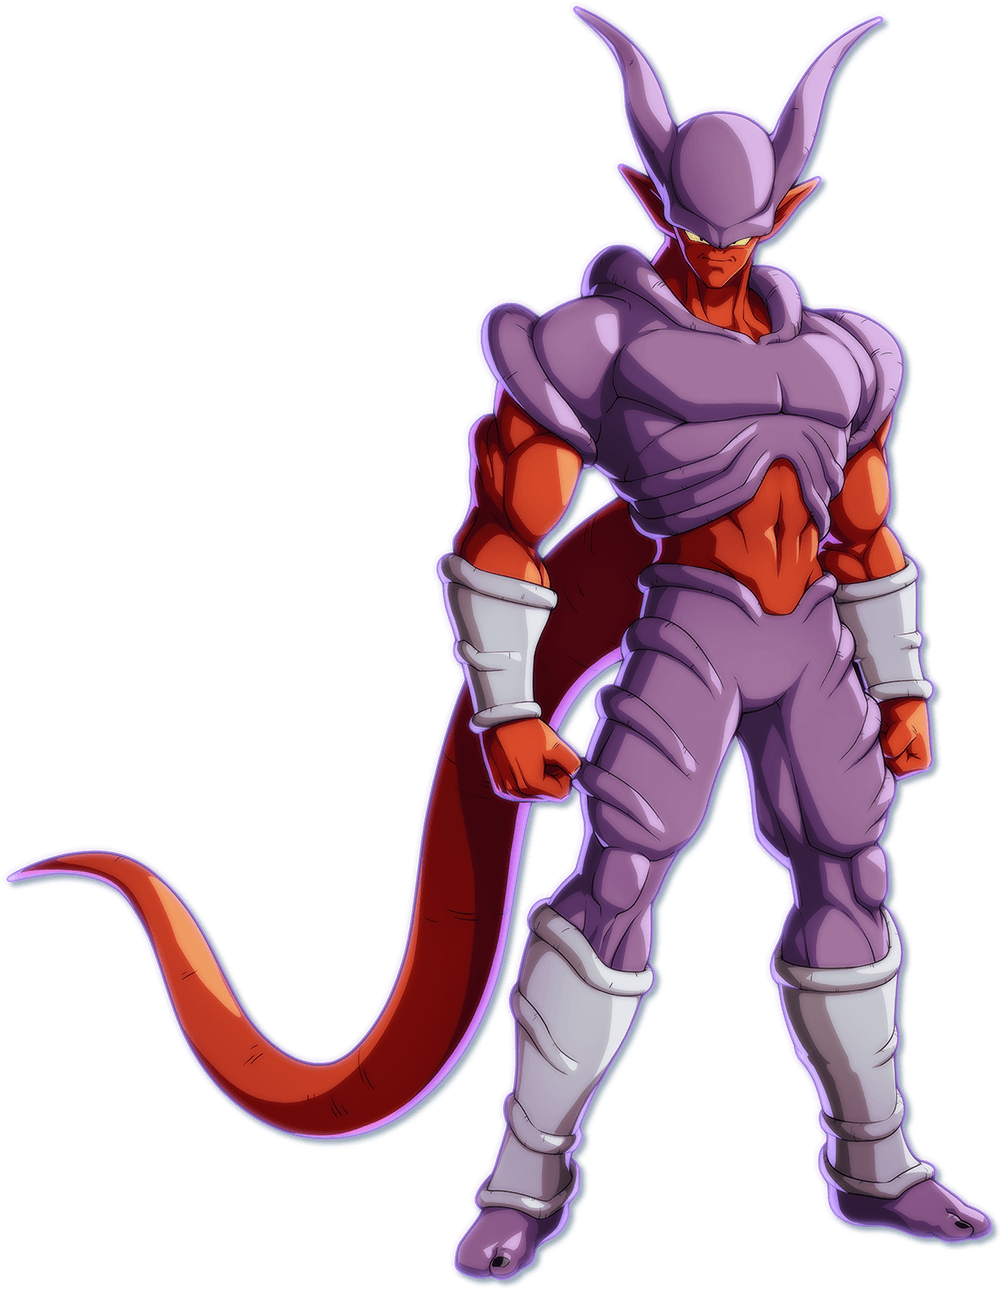 Dragon Ball FighterZ Background PNG Image